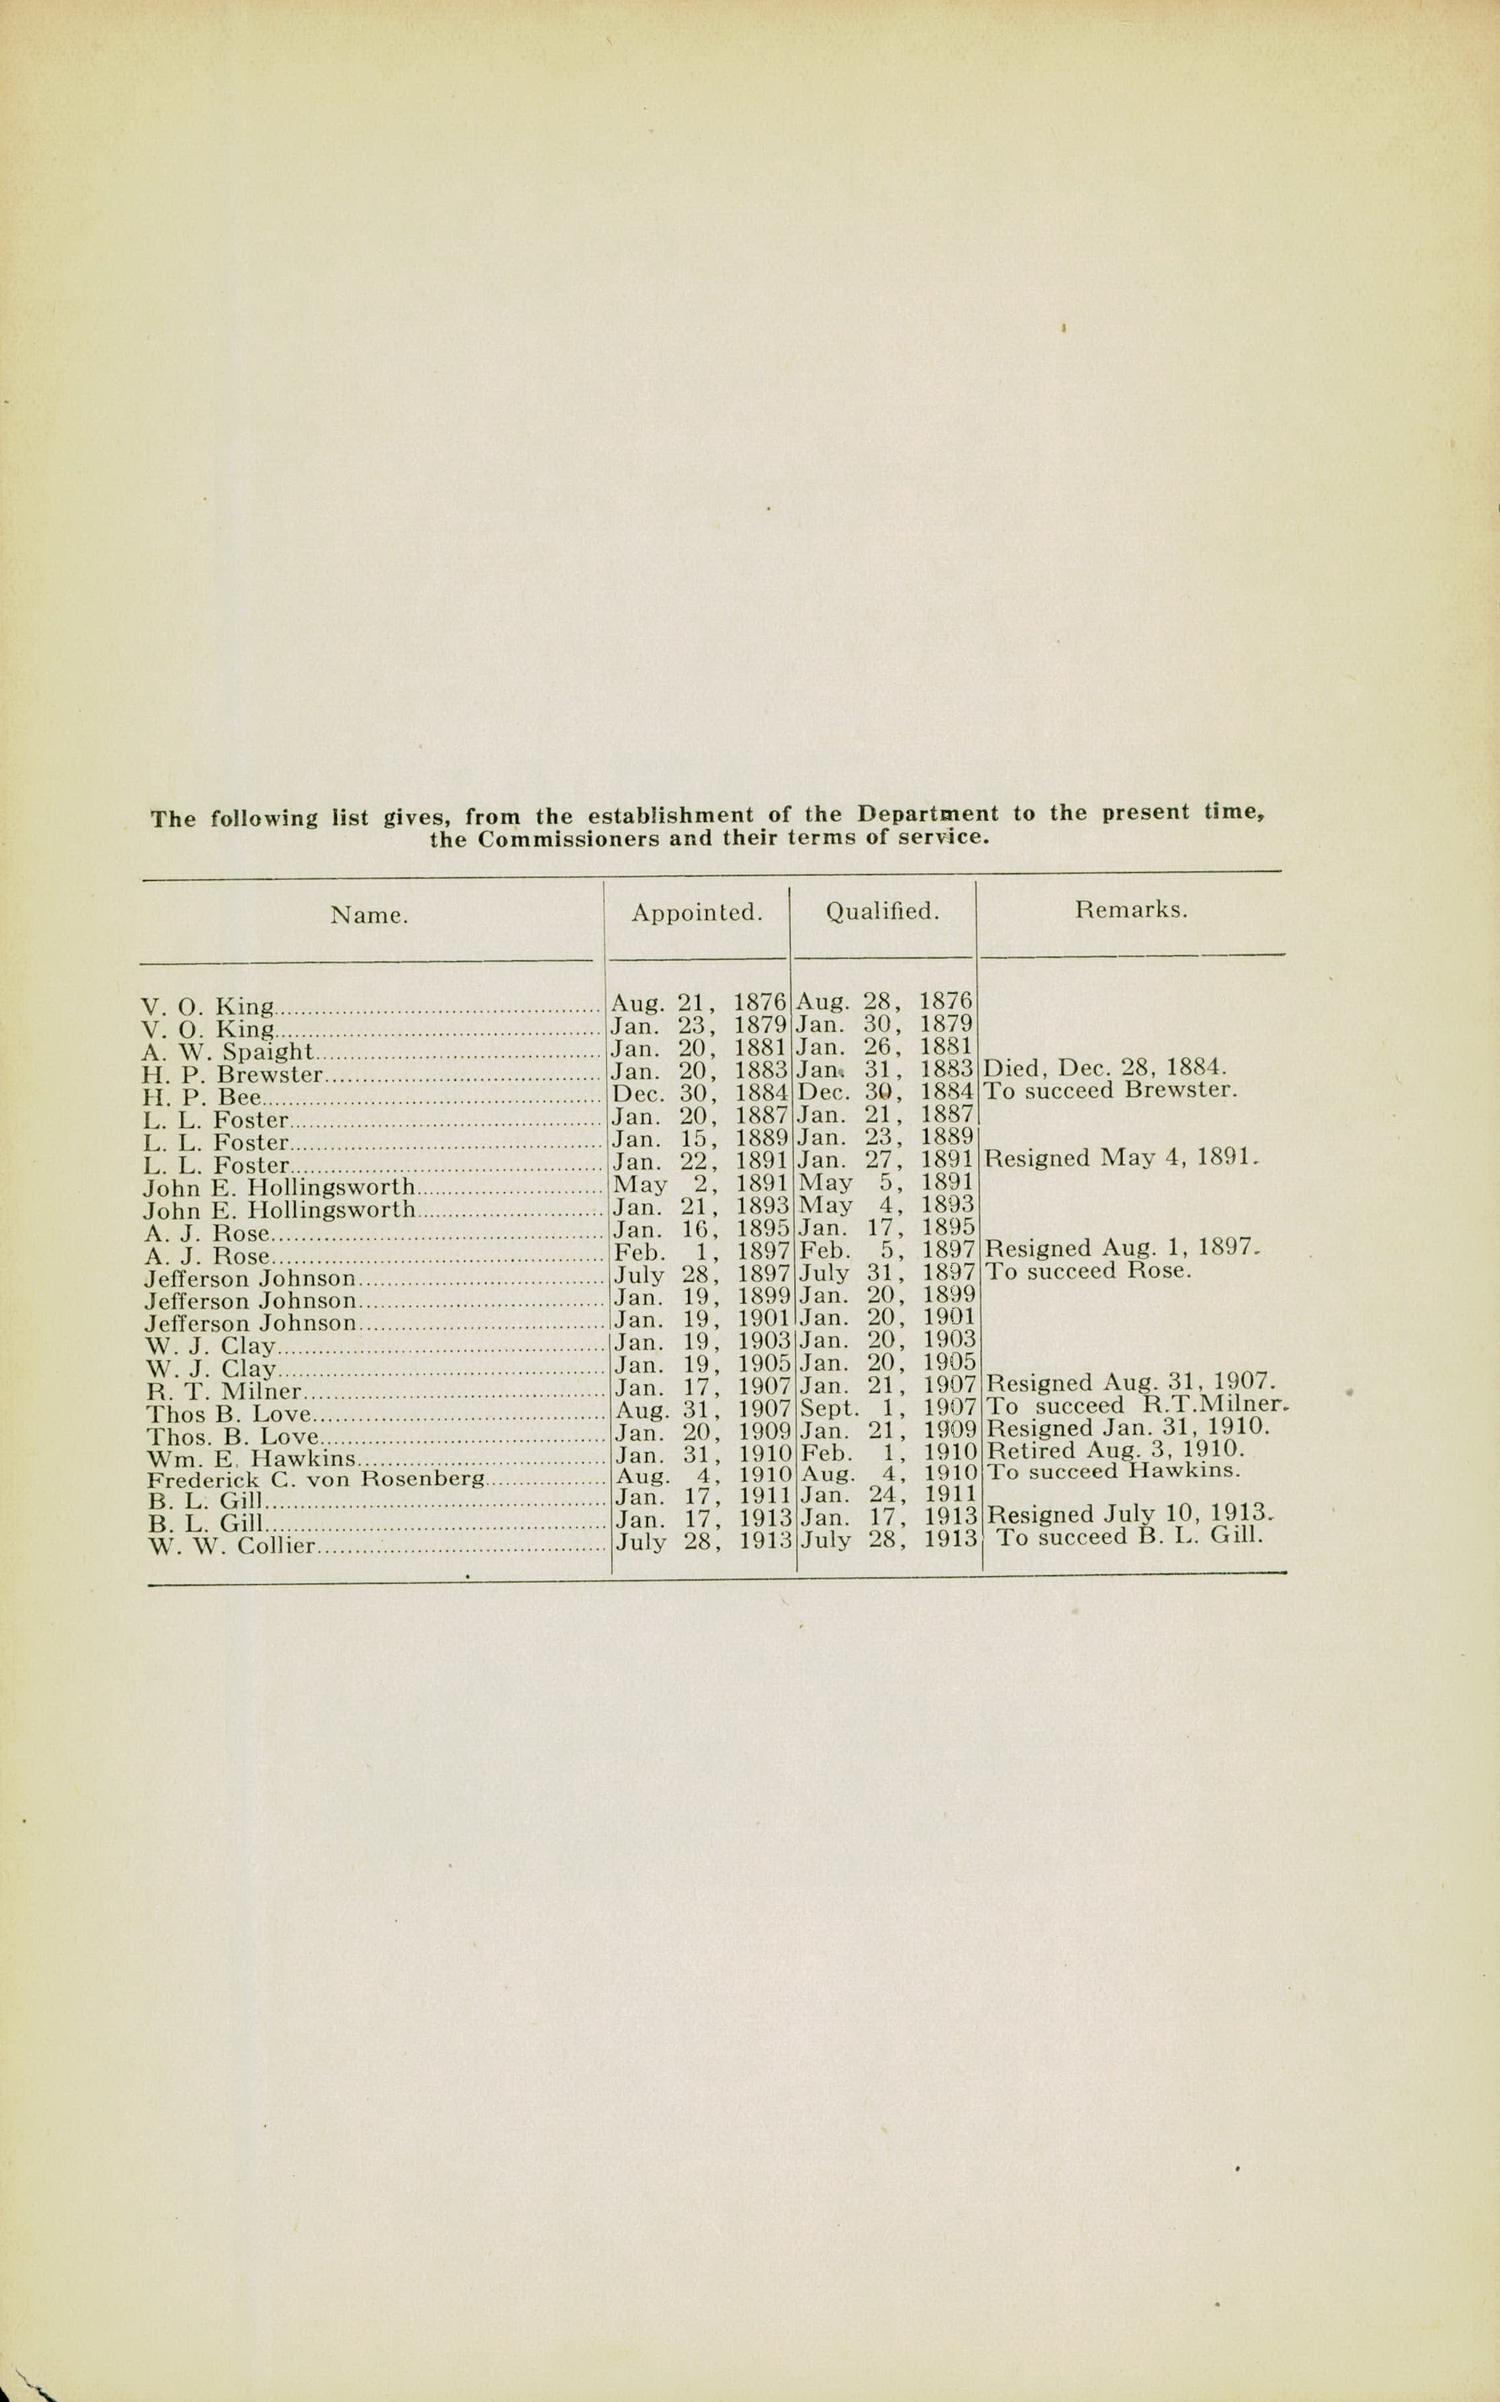 Texas Commissioner of Insurance and Banking Annual Report: 1914
                                                
                                                    ATTACHMENT
                                                